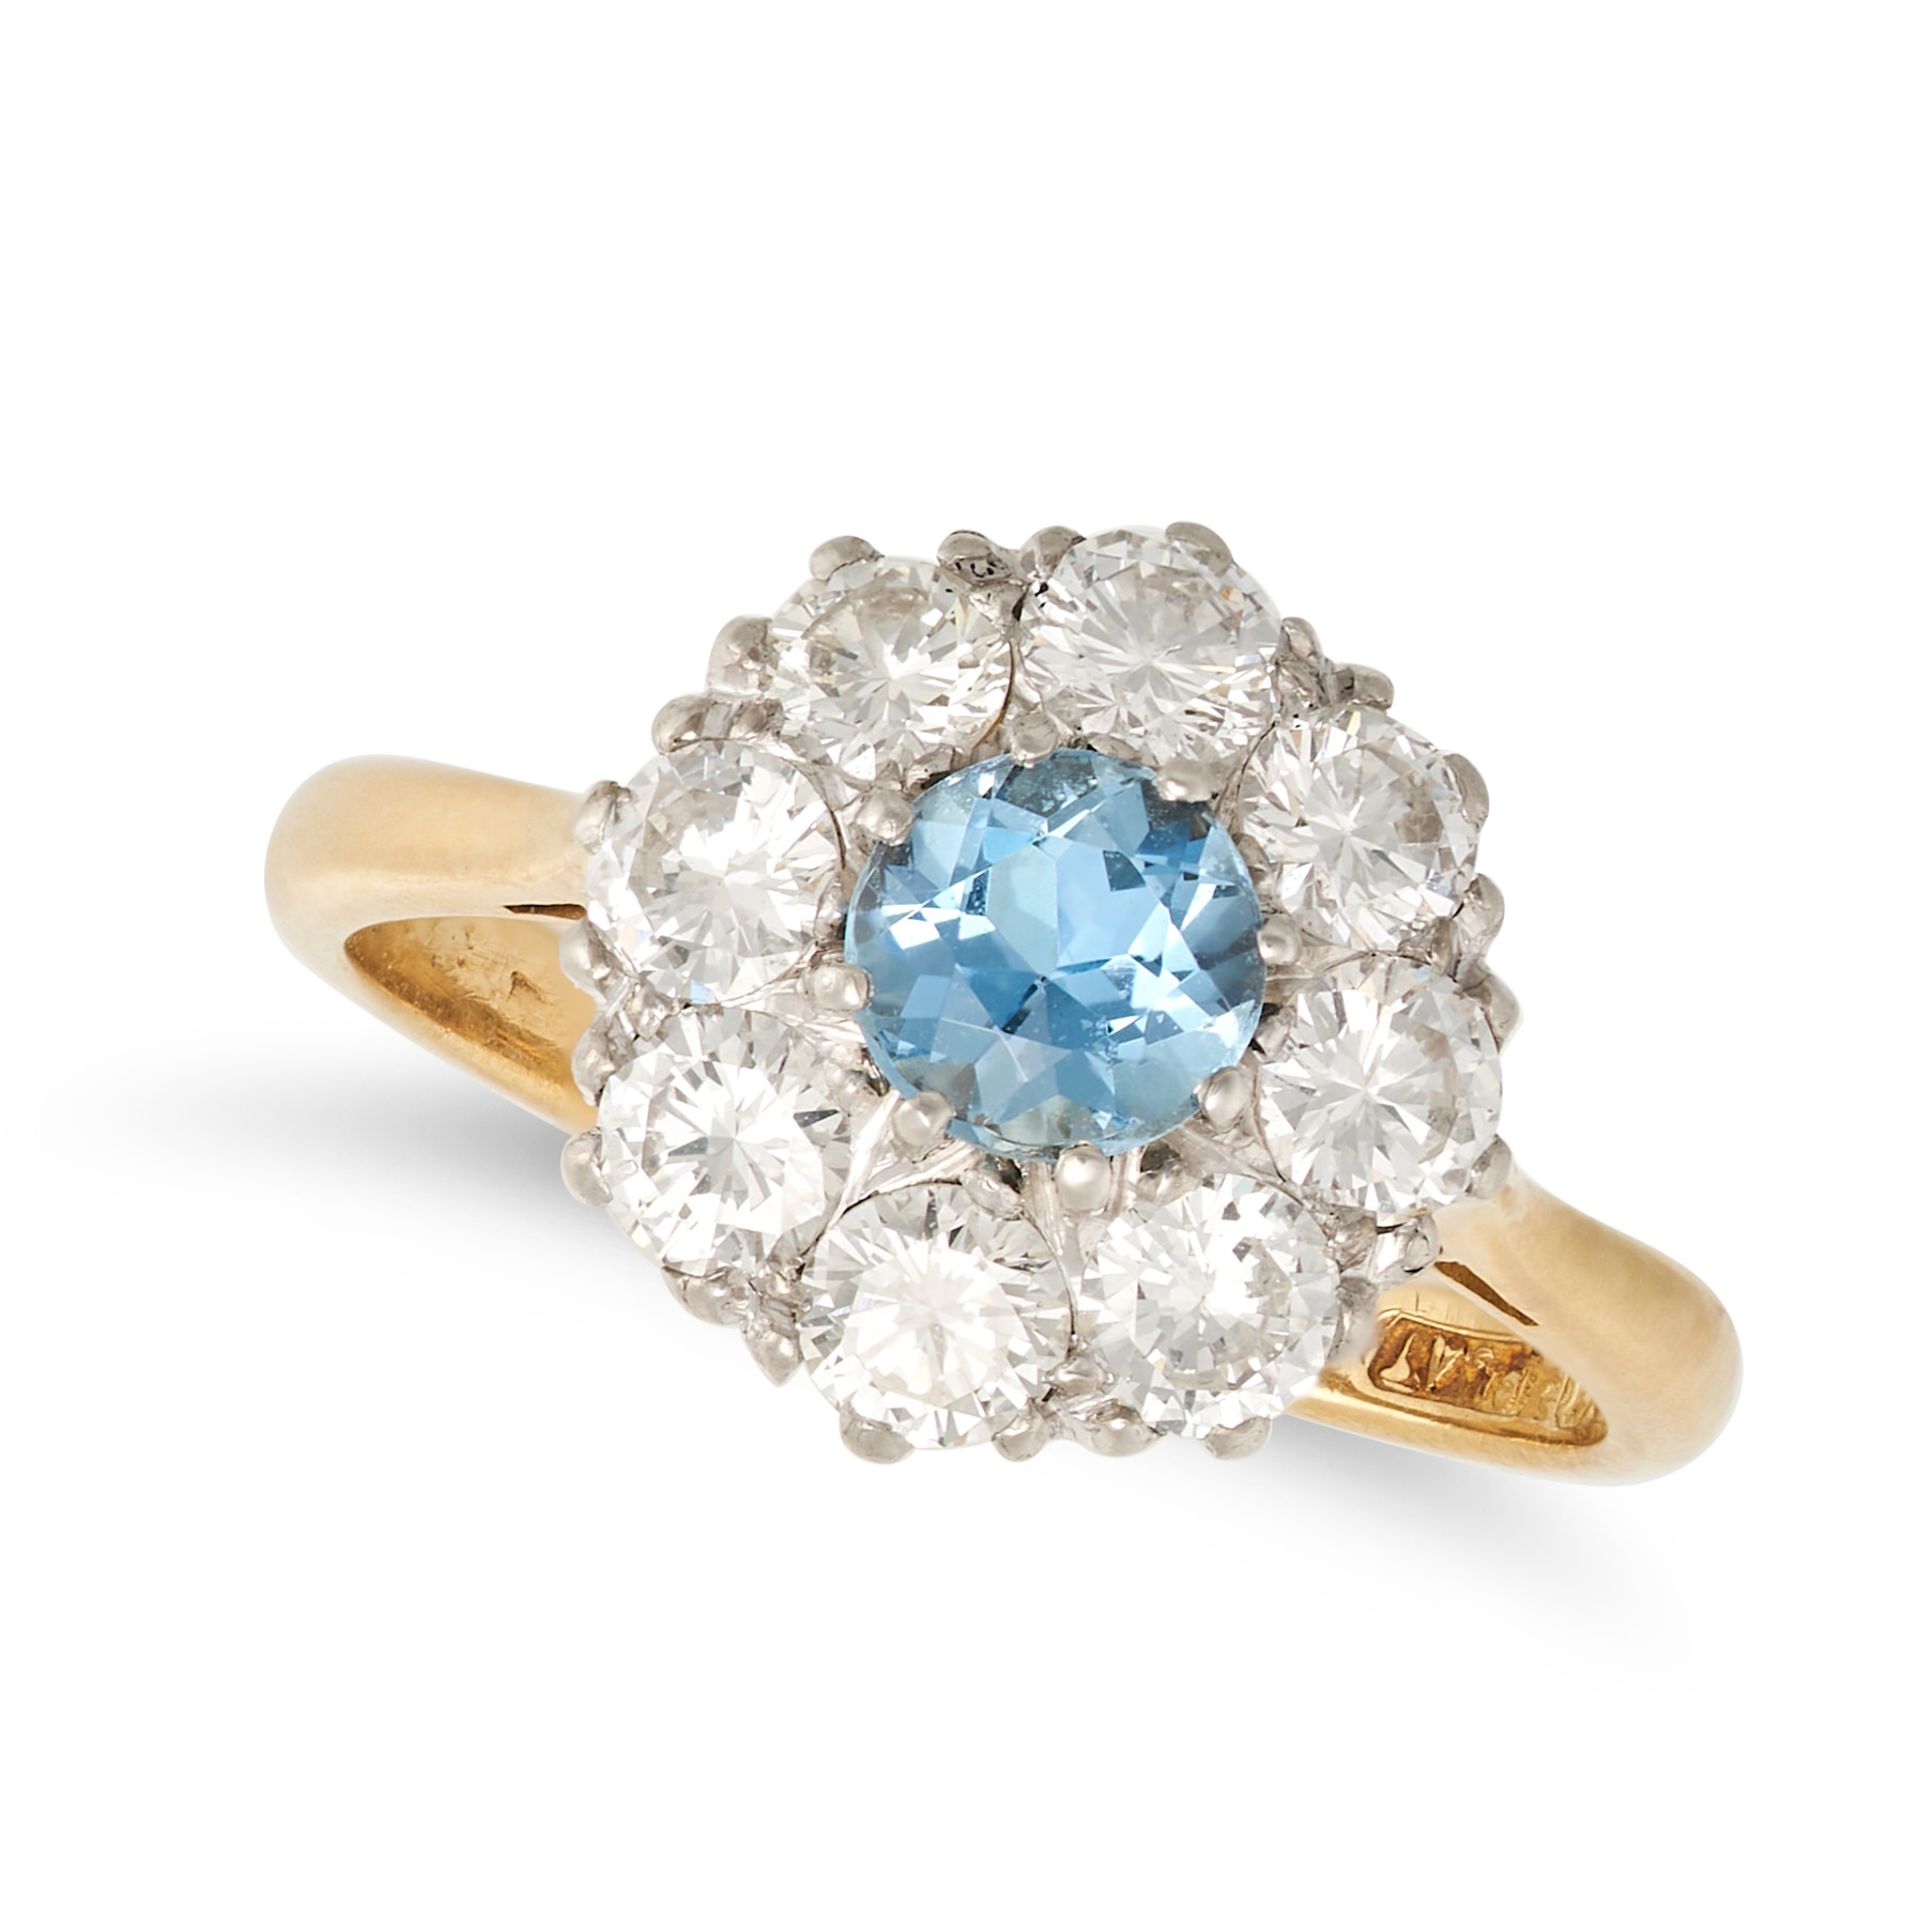 AN AQUAMARINE AND DIAMOND CLUSTER RING in 18ct yellow gold and platinum, set with a round cut aqu...